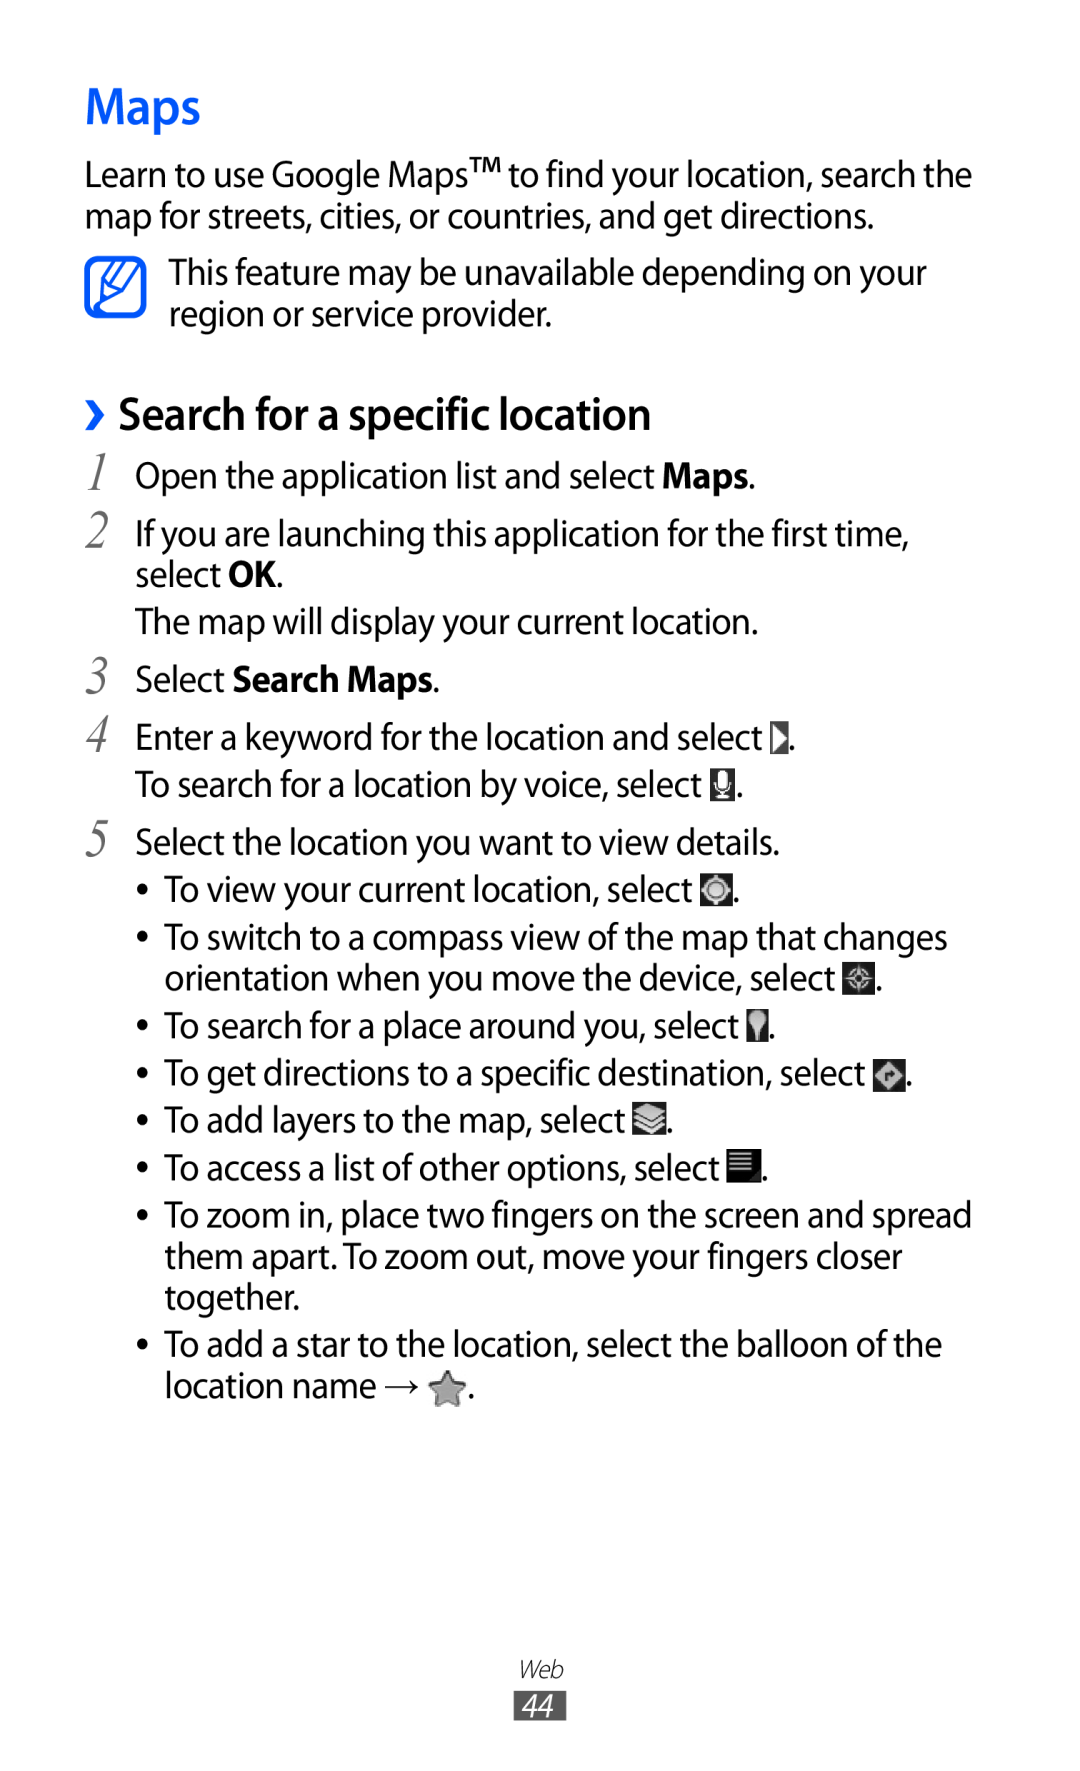 Samsung GT-P7320FKAPAN, GT-P7320UWAVD2, GT-P7320FKAOPT manual Search for a specific location, Select Search Maps 